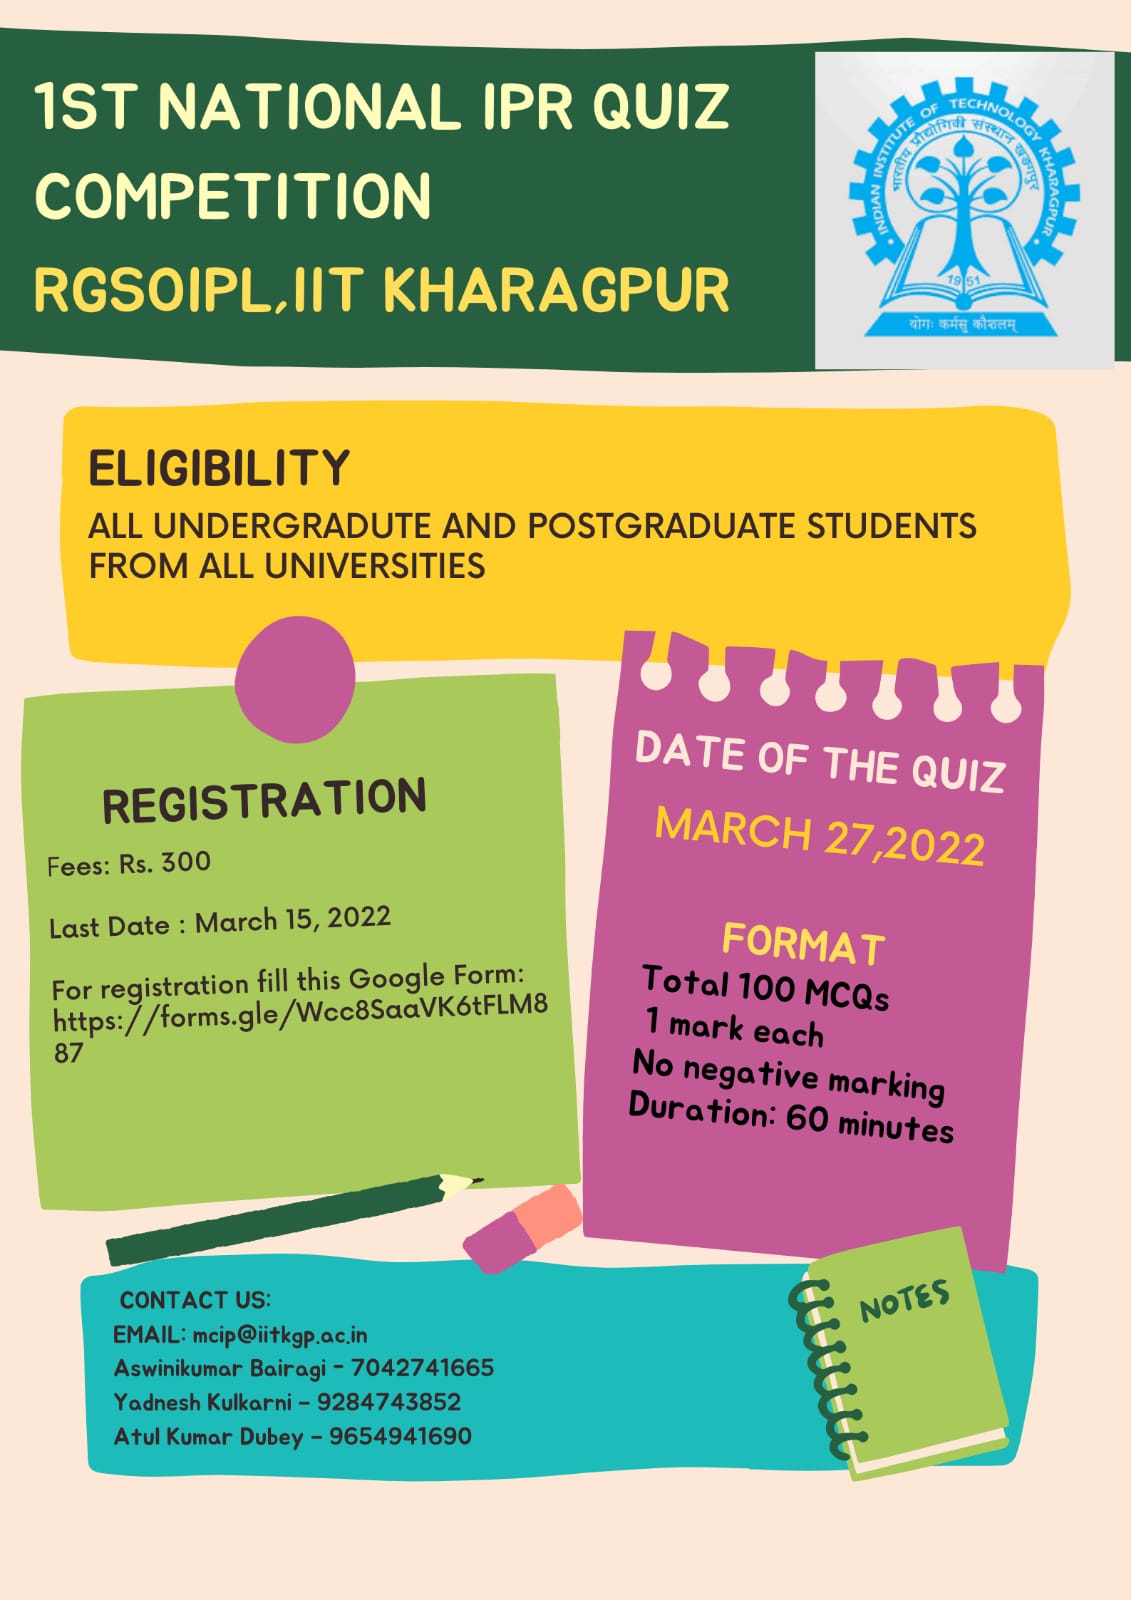 1st National Quiz Competition, 2022 by The Rajiv Gandhi School of Intellectual Property Law